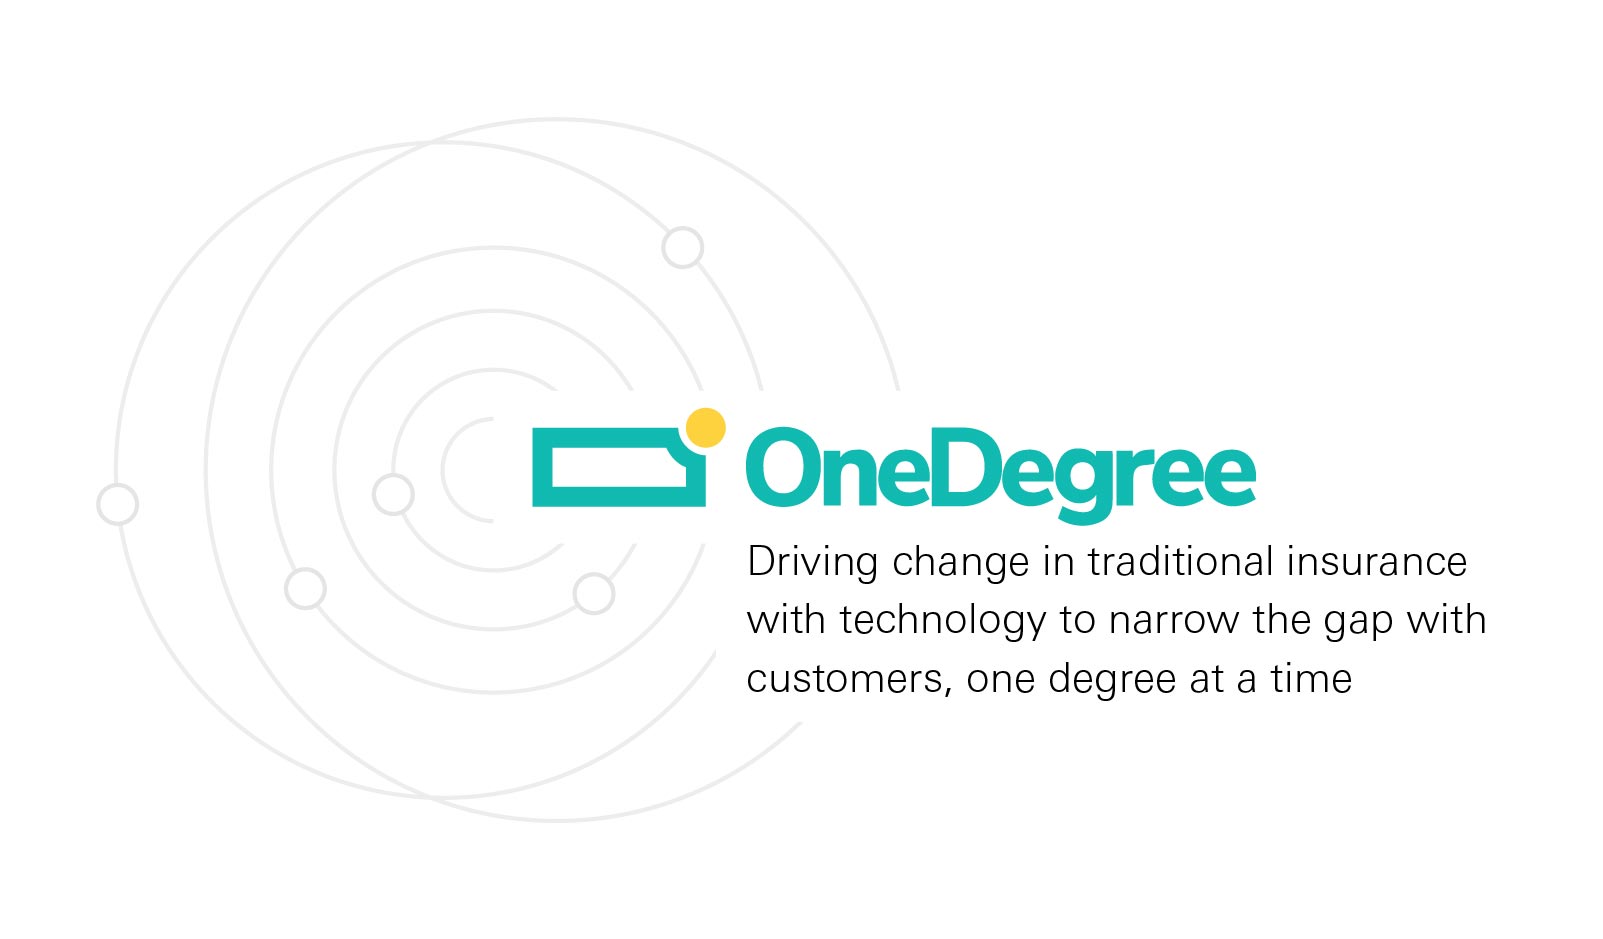 OneDegree’s ambition to re-shape insurance industry